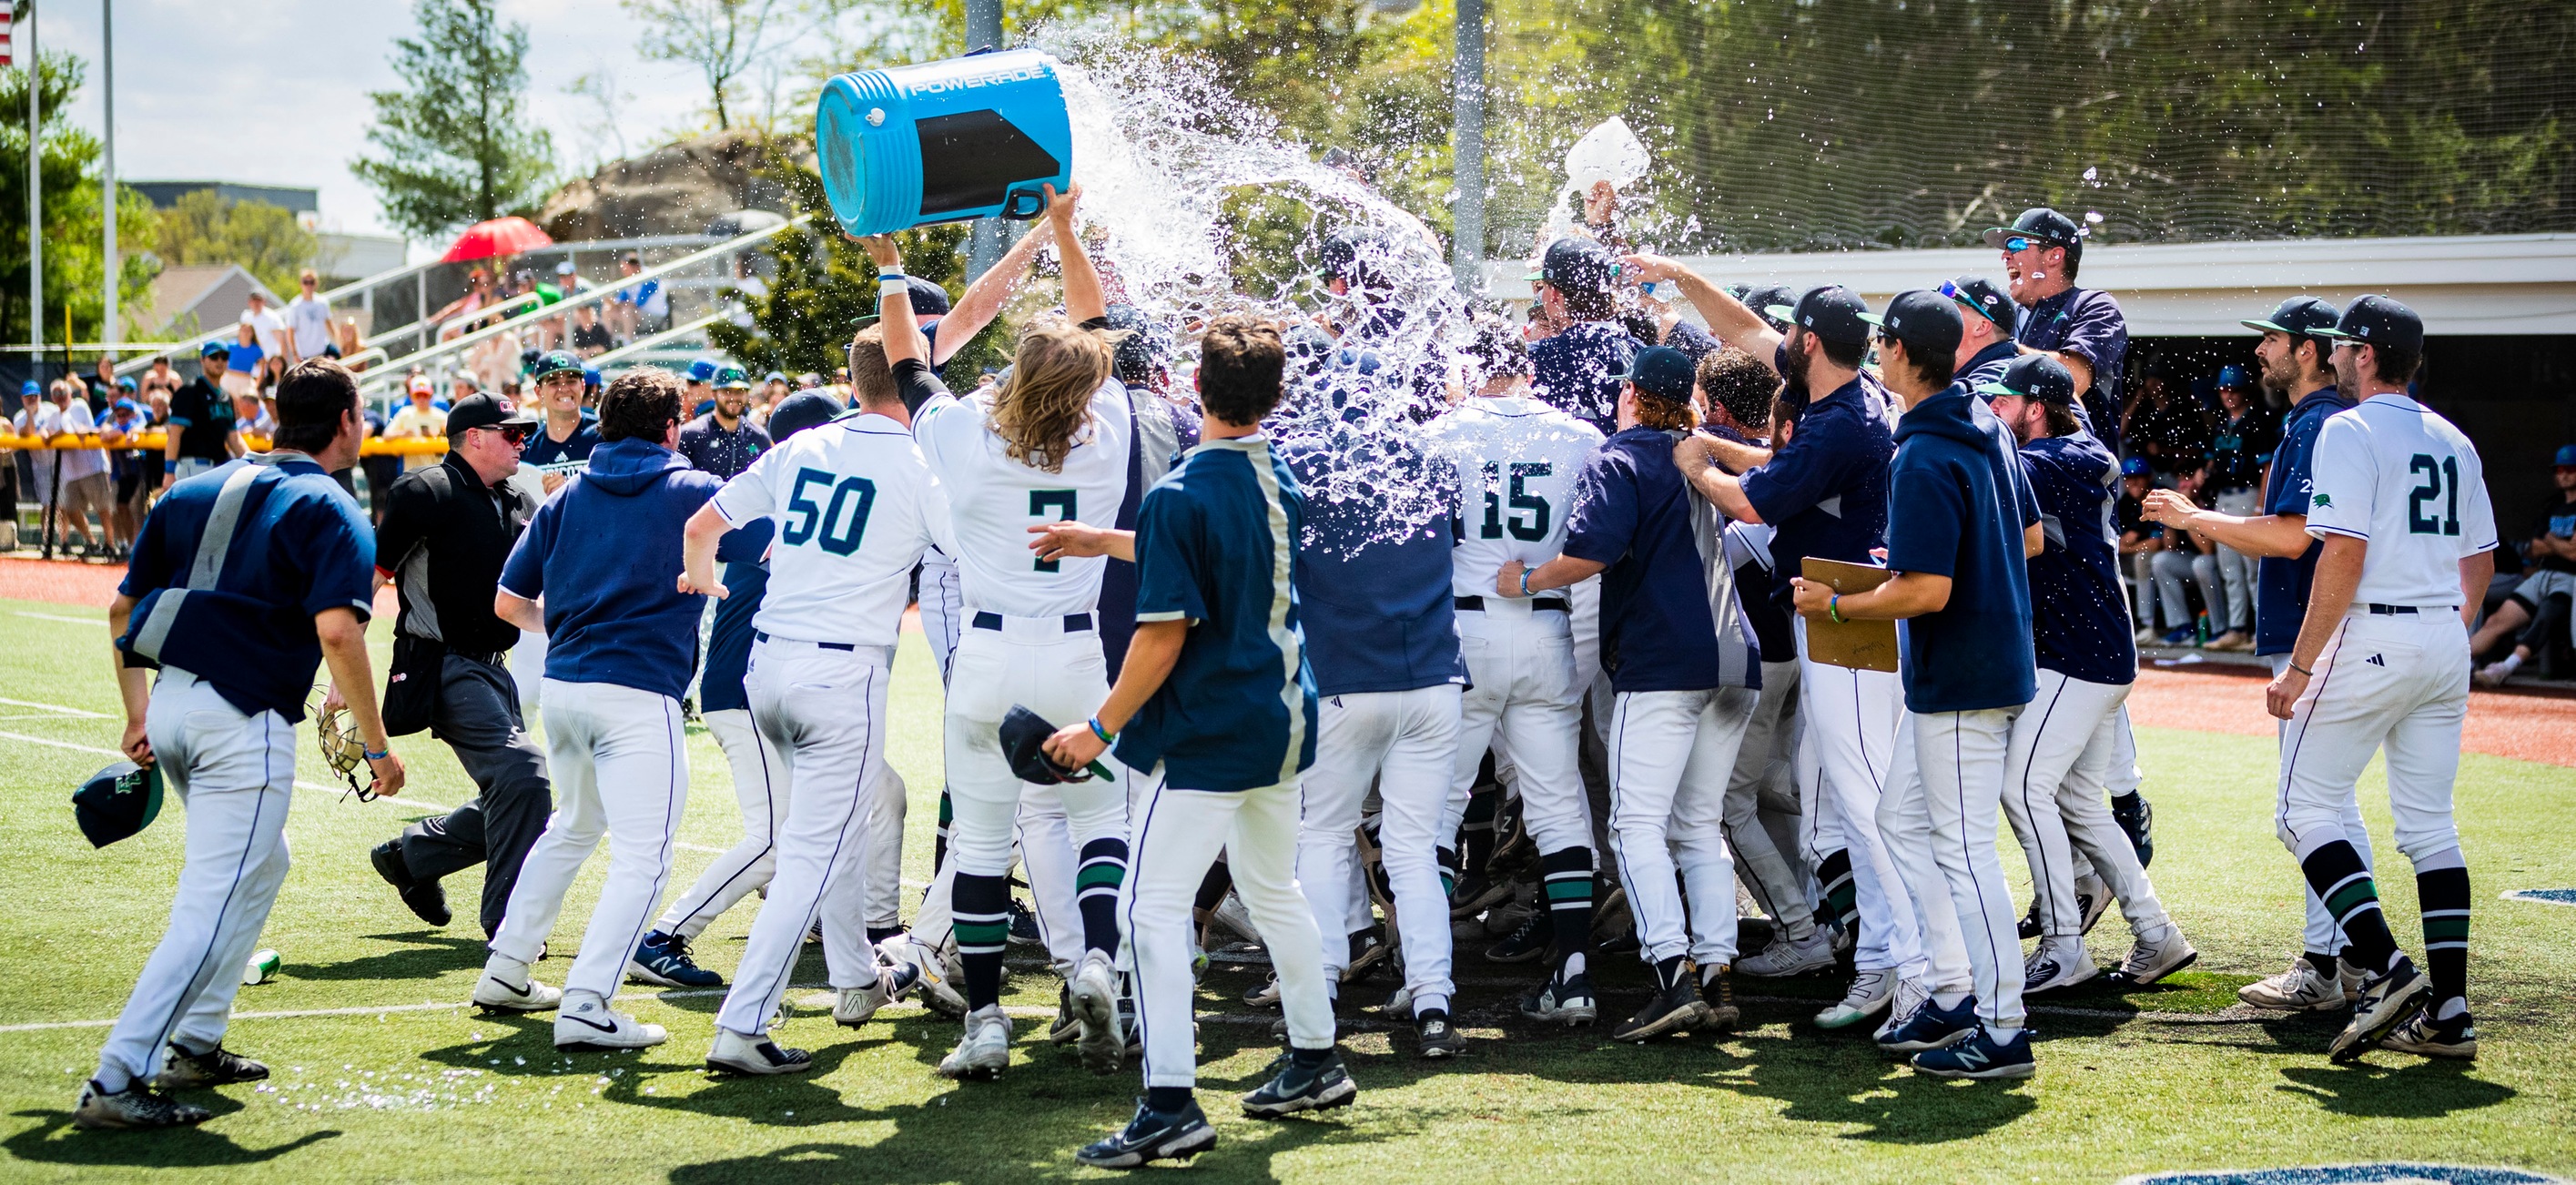 CCC TOURNAMENT: MacDougall Launches Walk-Off Homer To Send Endicott To Championship Round